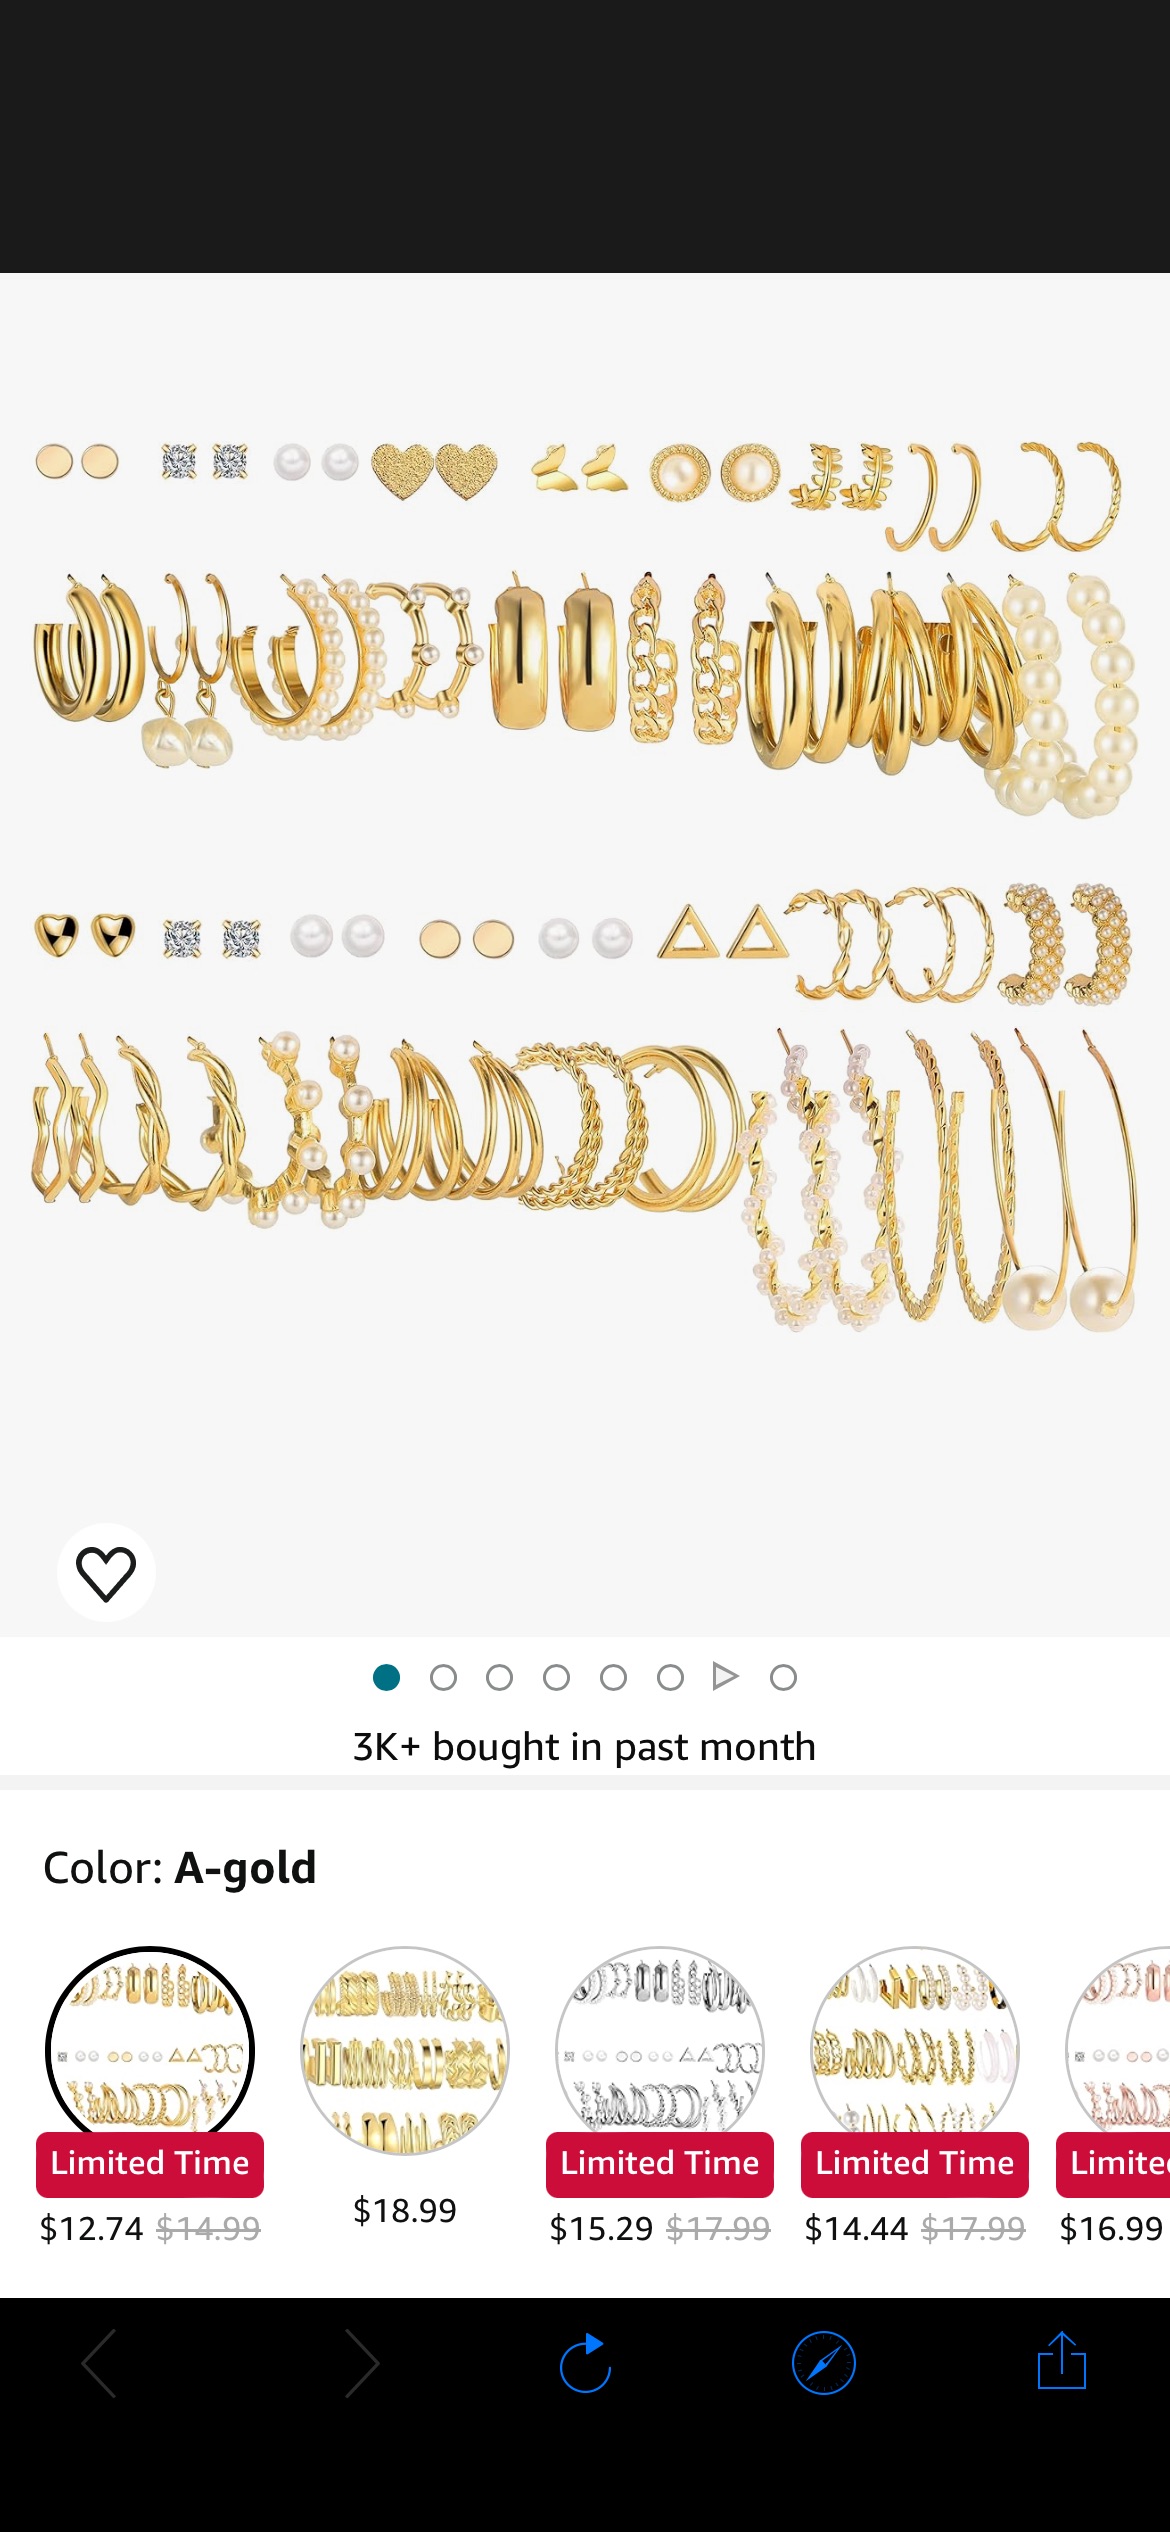 Amazon.com: 36 Pairs Gold Earrings Set for Women Girls, Fashion Pearl Chain Link Stud Drop Dangle Earrings Multipack Hoop Earring Packs, Hypoallergenic Earrings for Birthday Party Jewelry Gift: Clothi